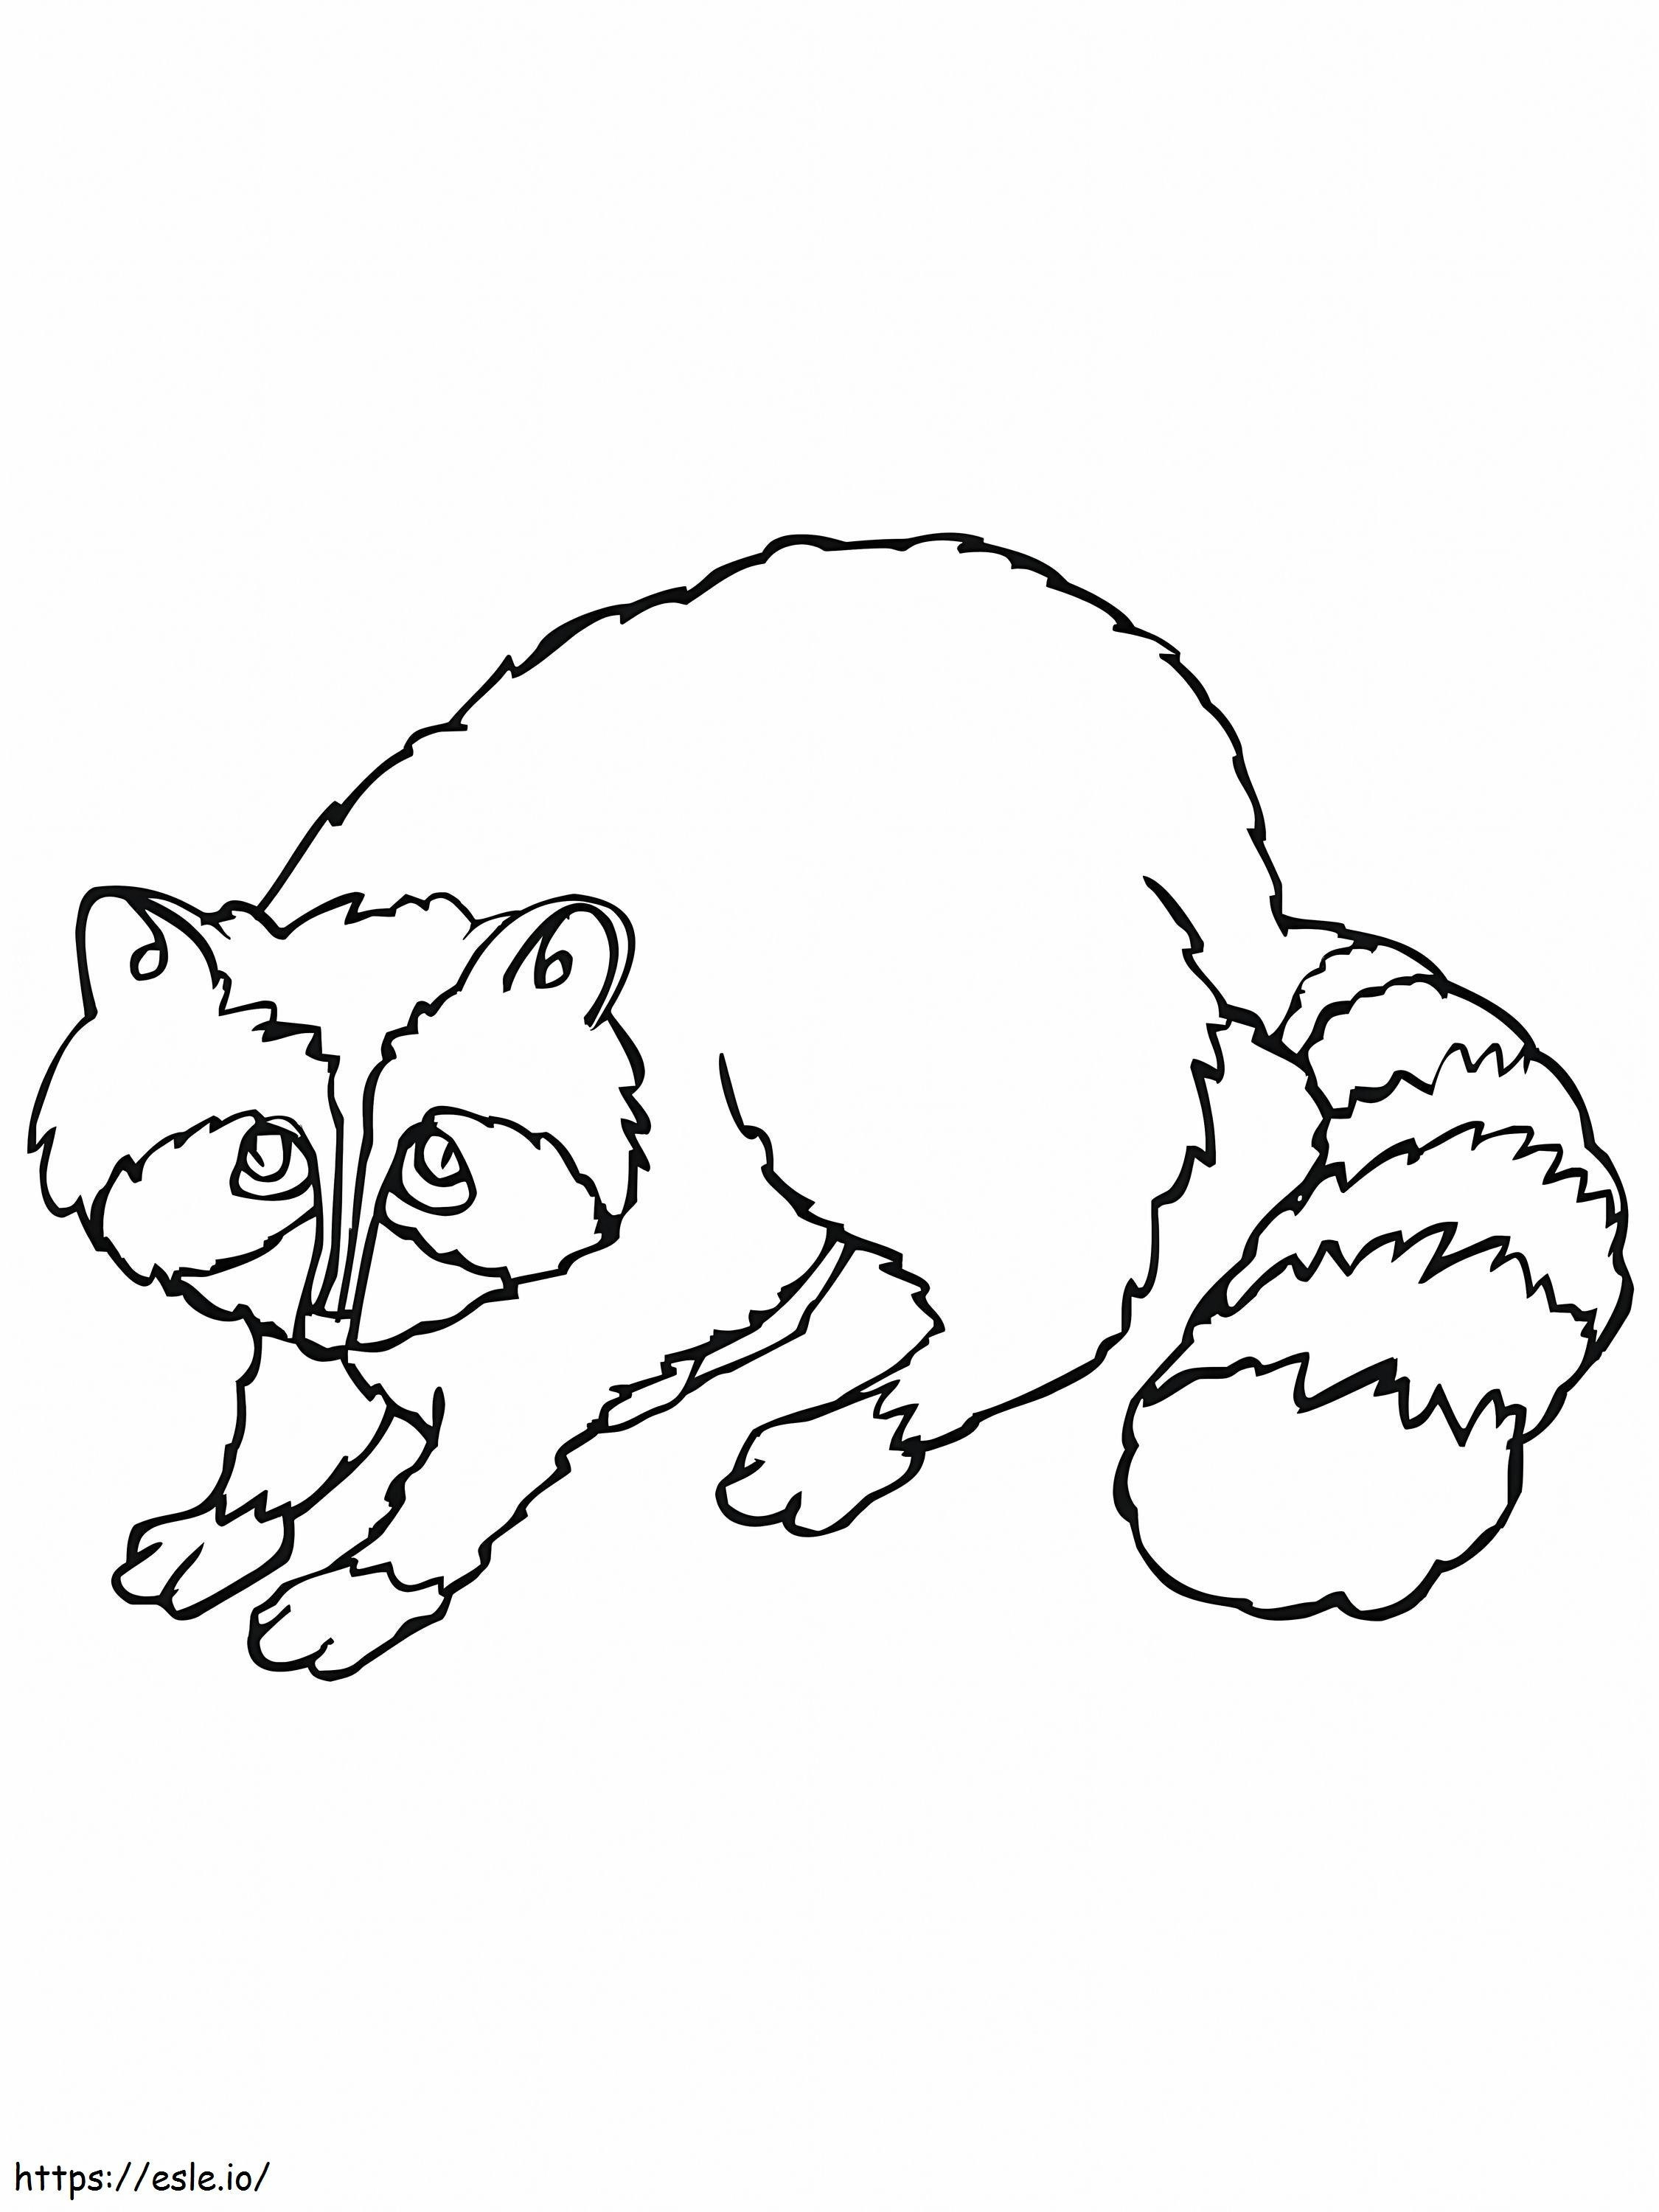 Basic Raccoon coloring page